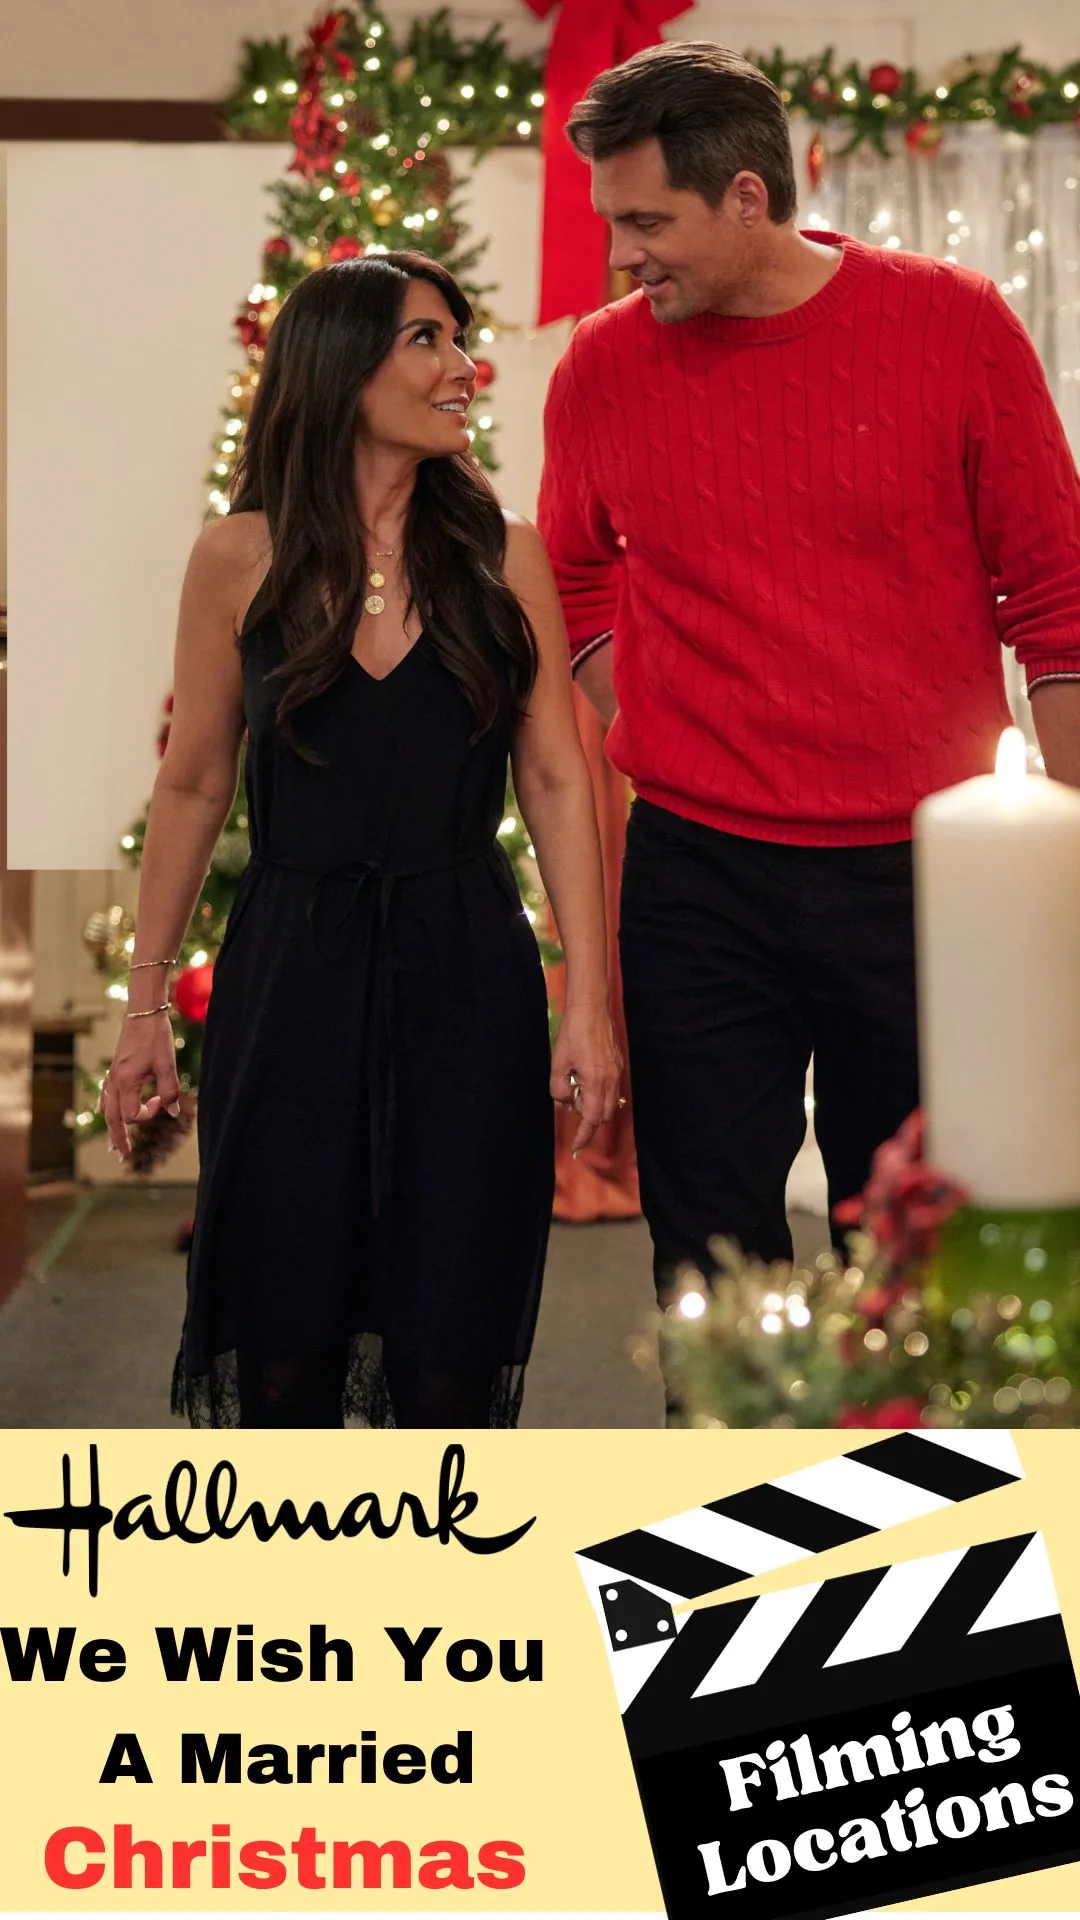 We Wish You a Married Christmas Filming Locations